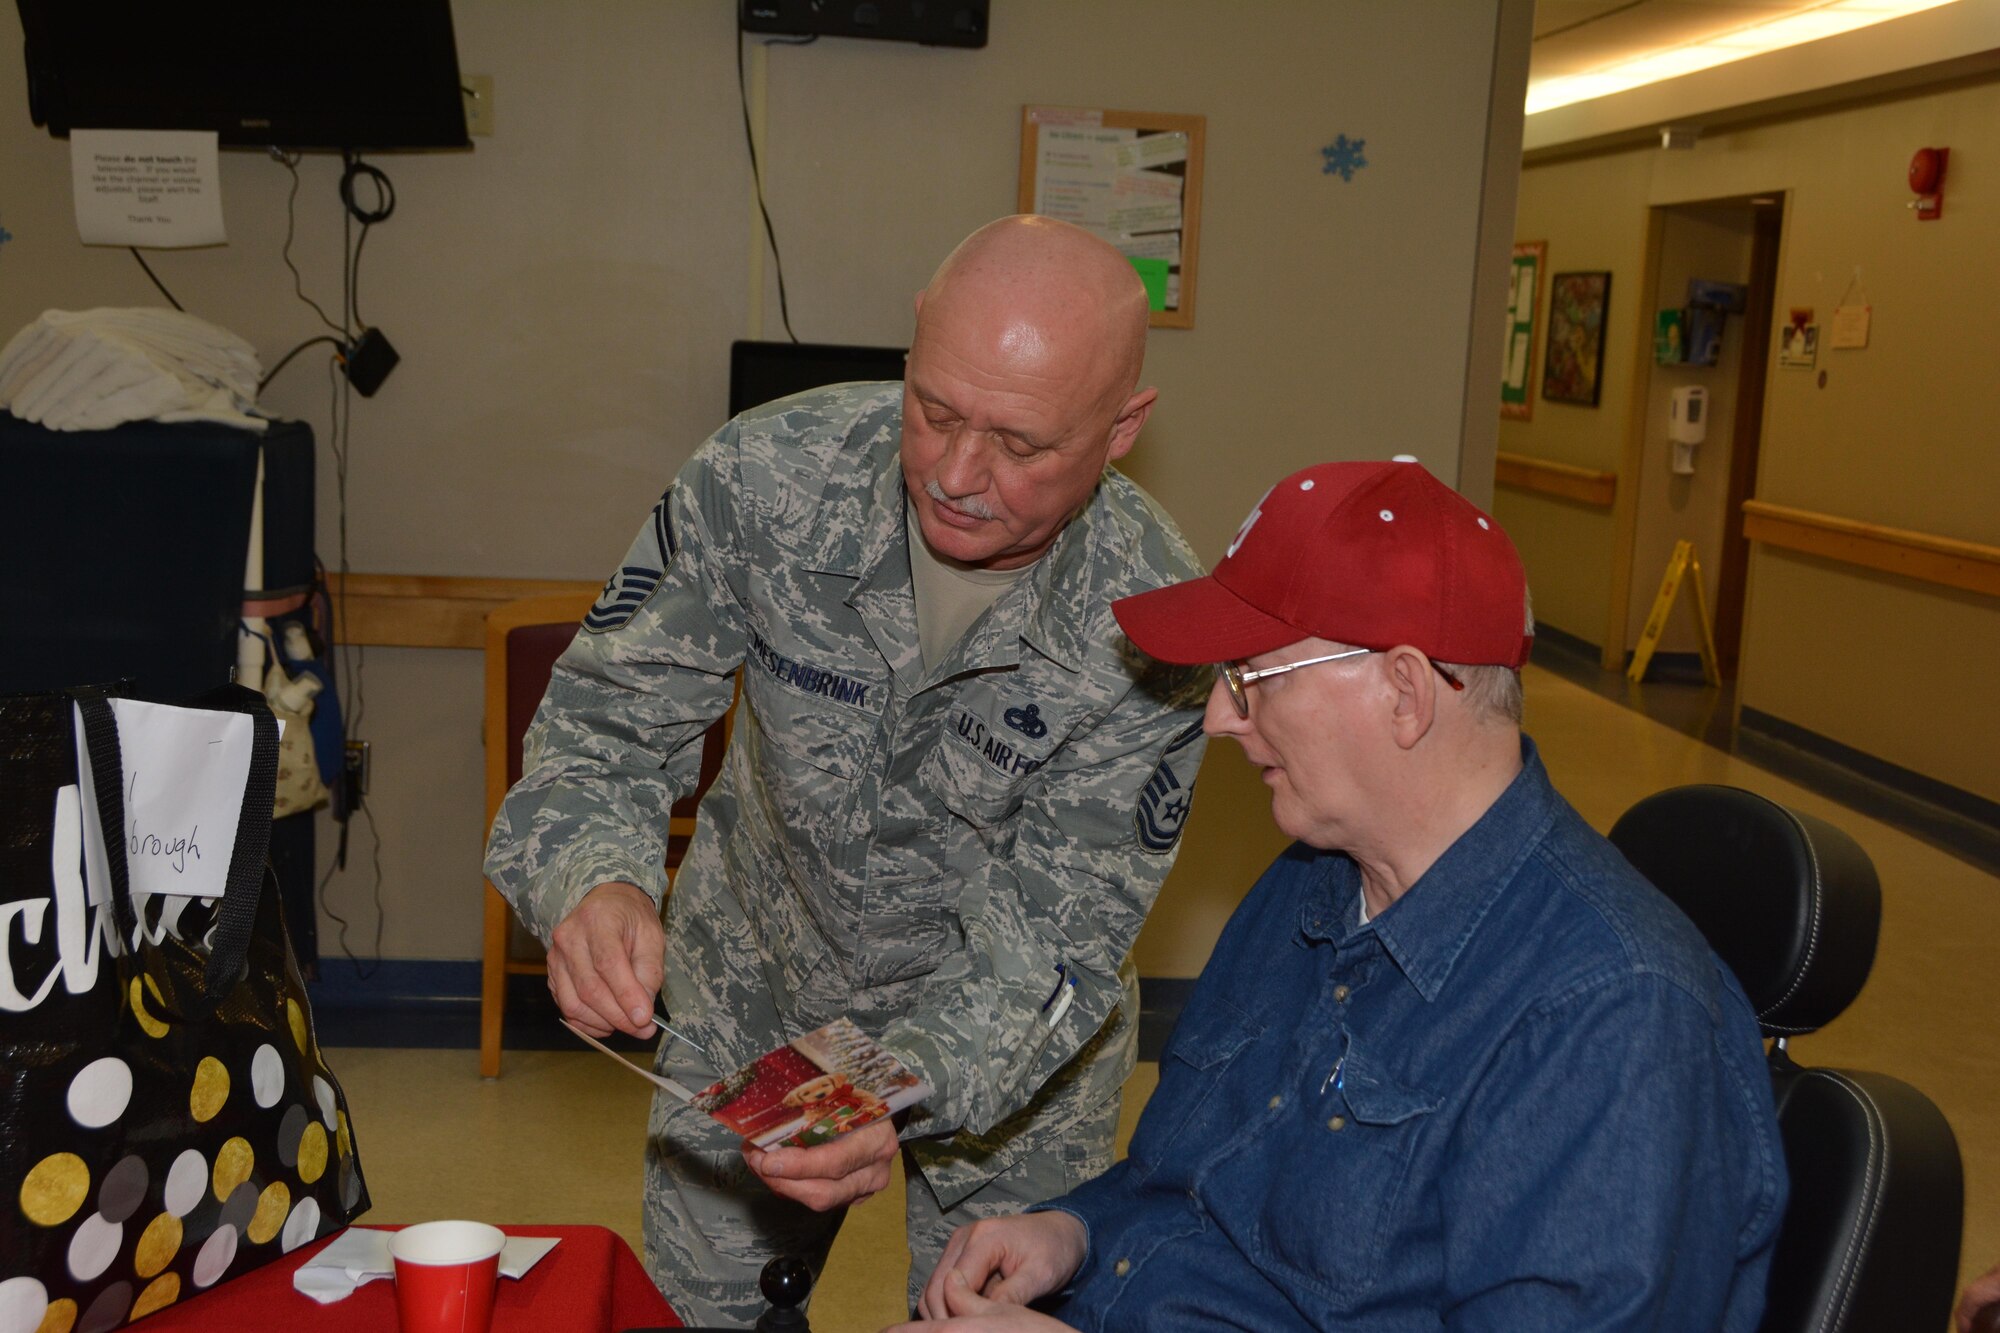 Senior Master Sgt. Rodney Mesenbrink of the 507th Maintenance Squadron presents a gift card to a resident of the Norman Veterans Center Dec. 22, 2016 in Norman, Okla.  Approximately 35 Airmen from Tinker Air Force Base visited and delivered gifts to the Veterans.(U.S. Air Force photo/Maj. Jon Quinlan) 